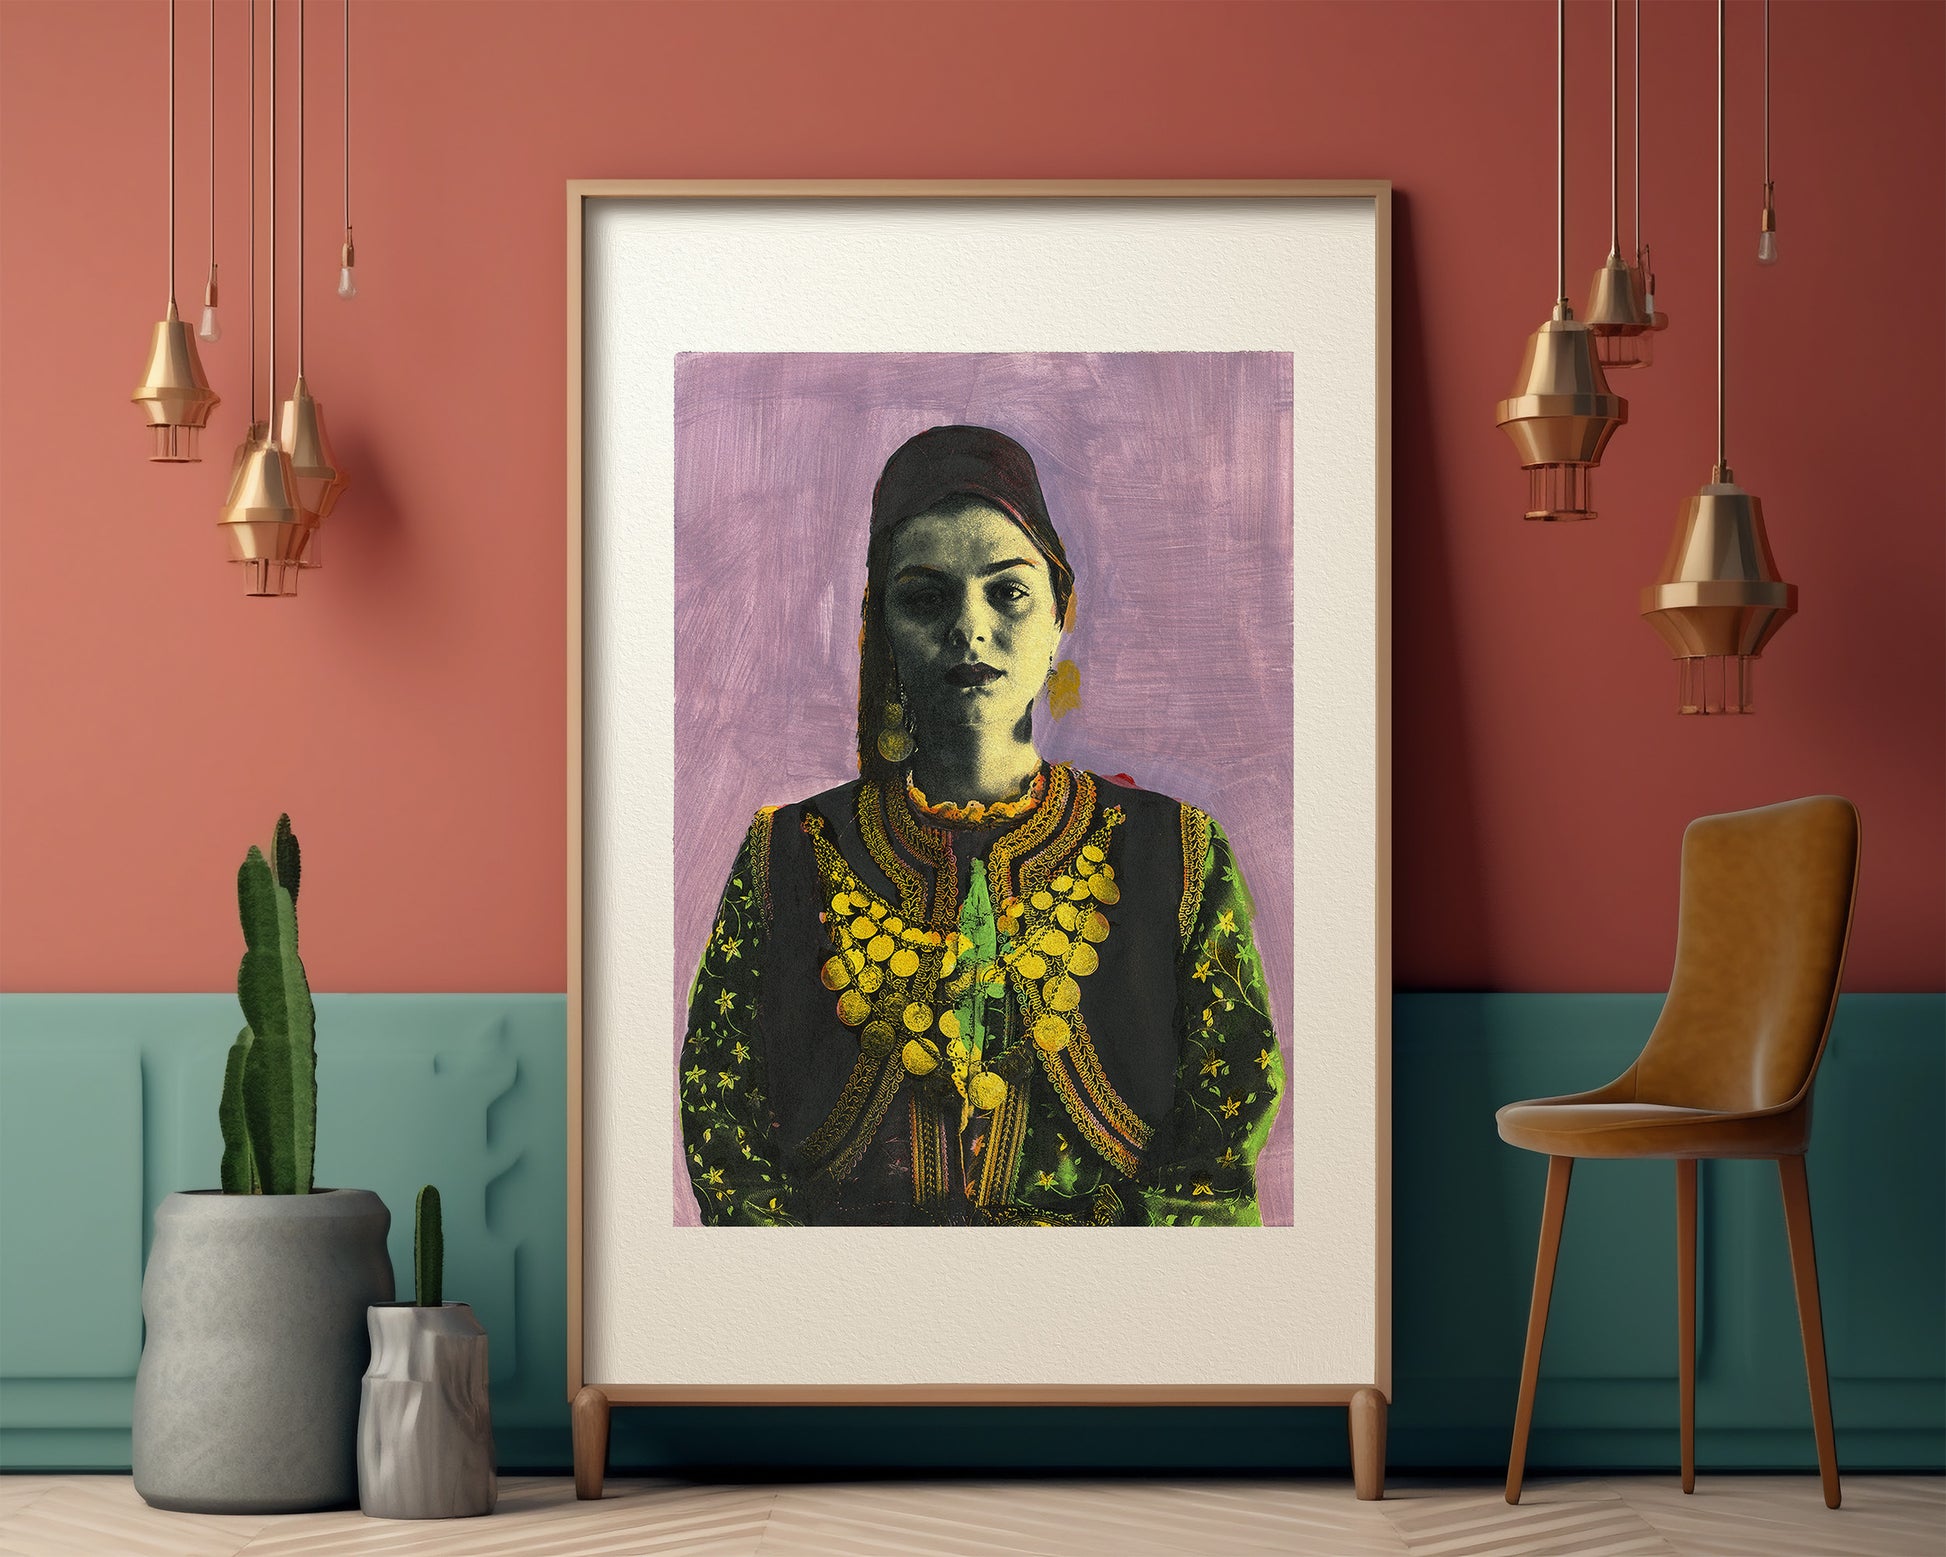 Painting Pop Art Wall Art from Greece | Mauve Kastoria Urban Costume from Macedonia, by George Tatakis - inside an eclectic room